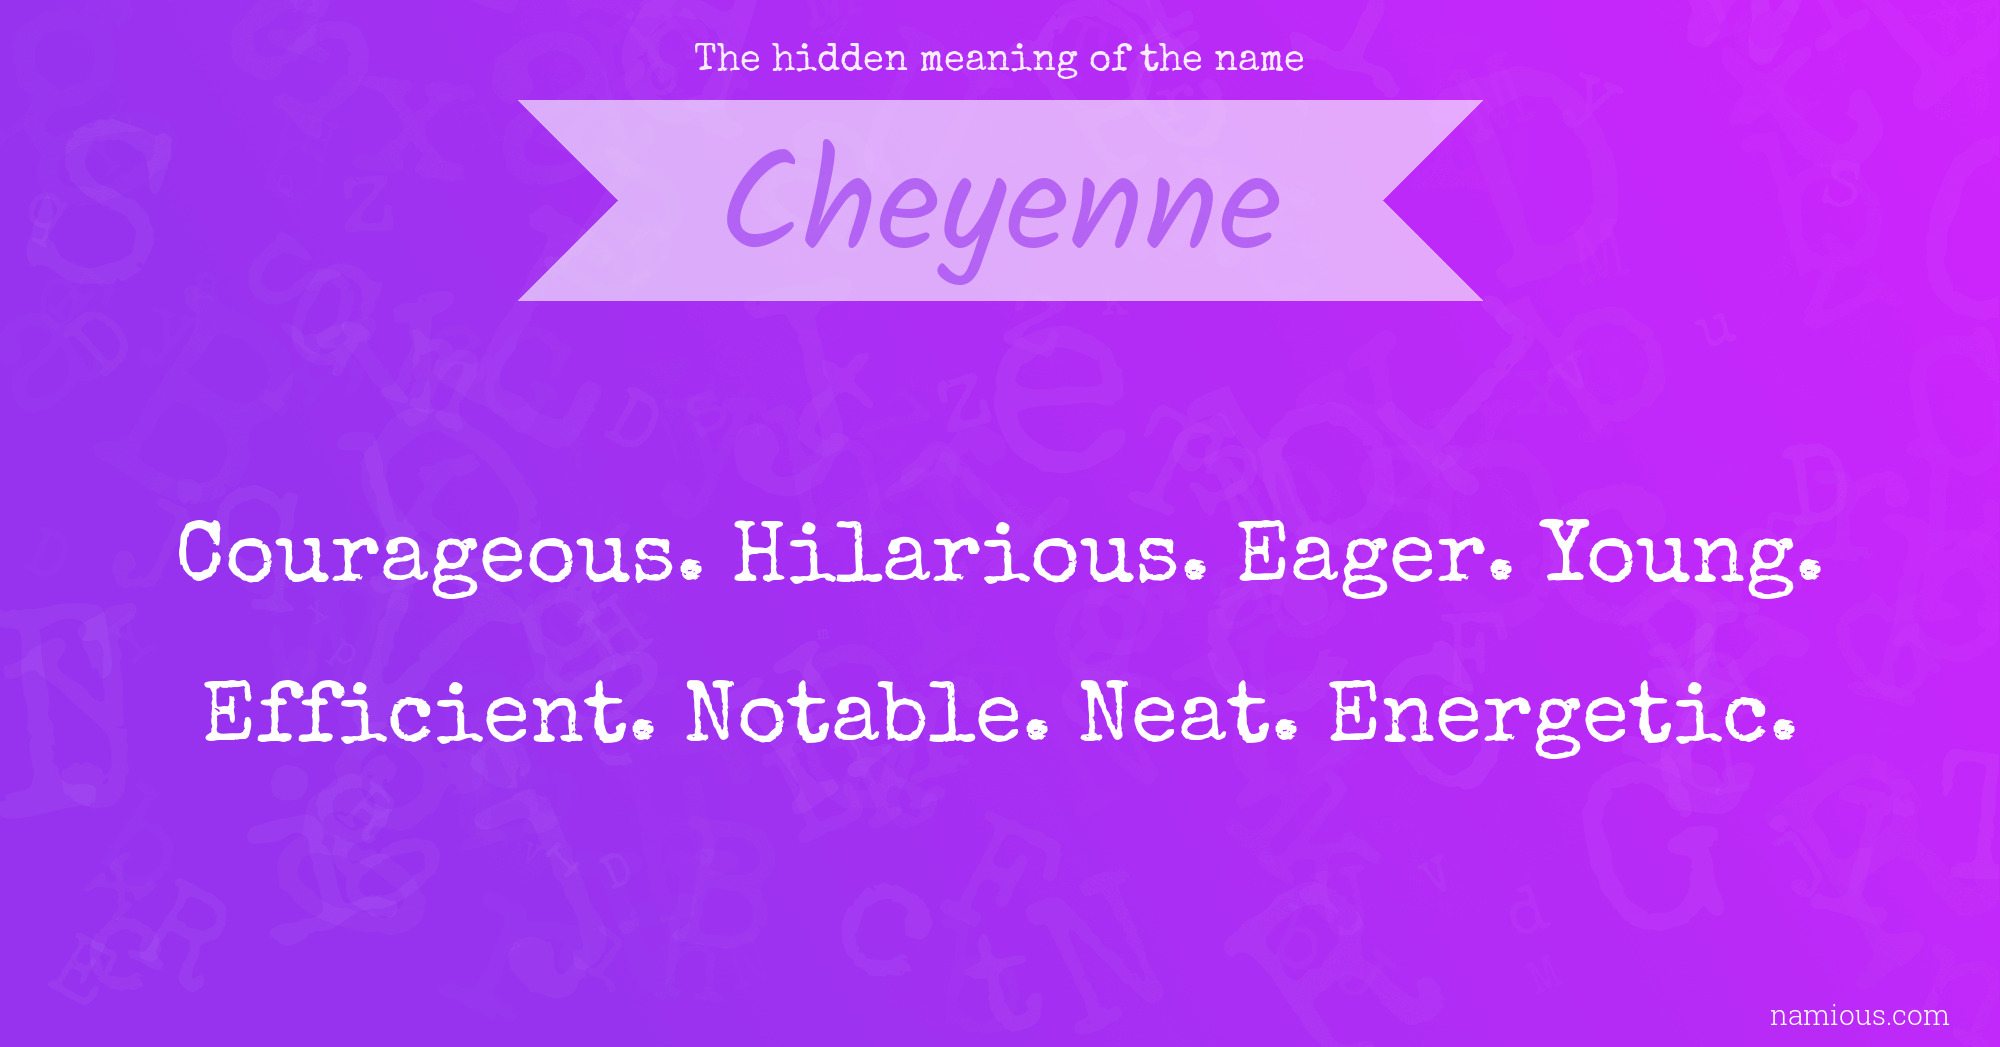 The hidden meaning of the name Cheyenne